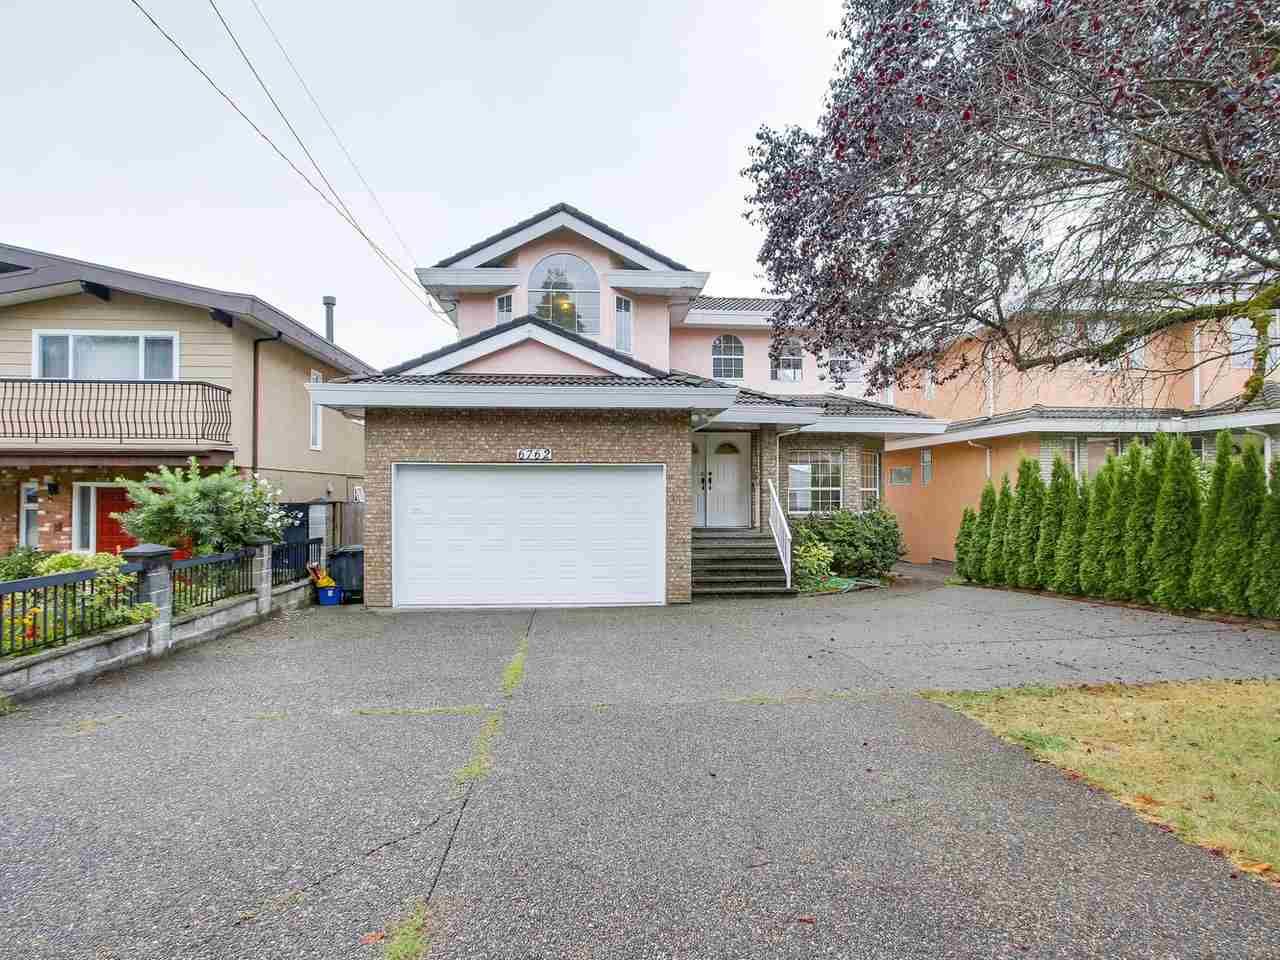 We have sold a property at 6762 KITCHENER ST in Burnaby